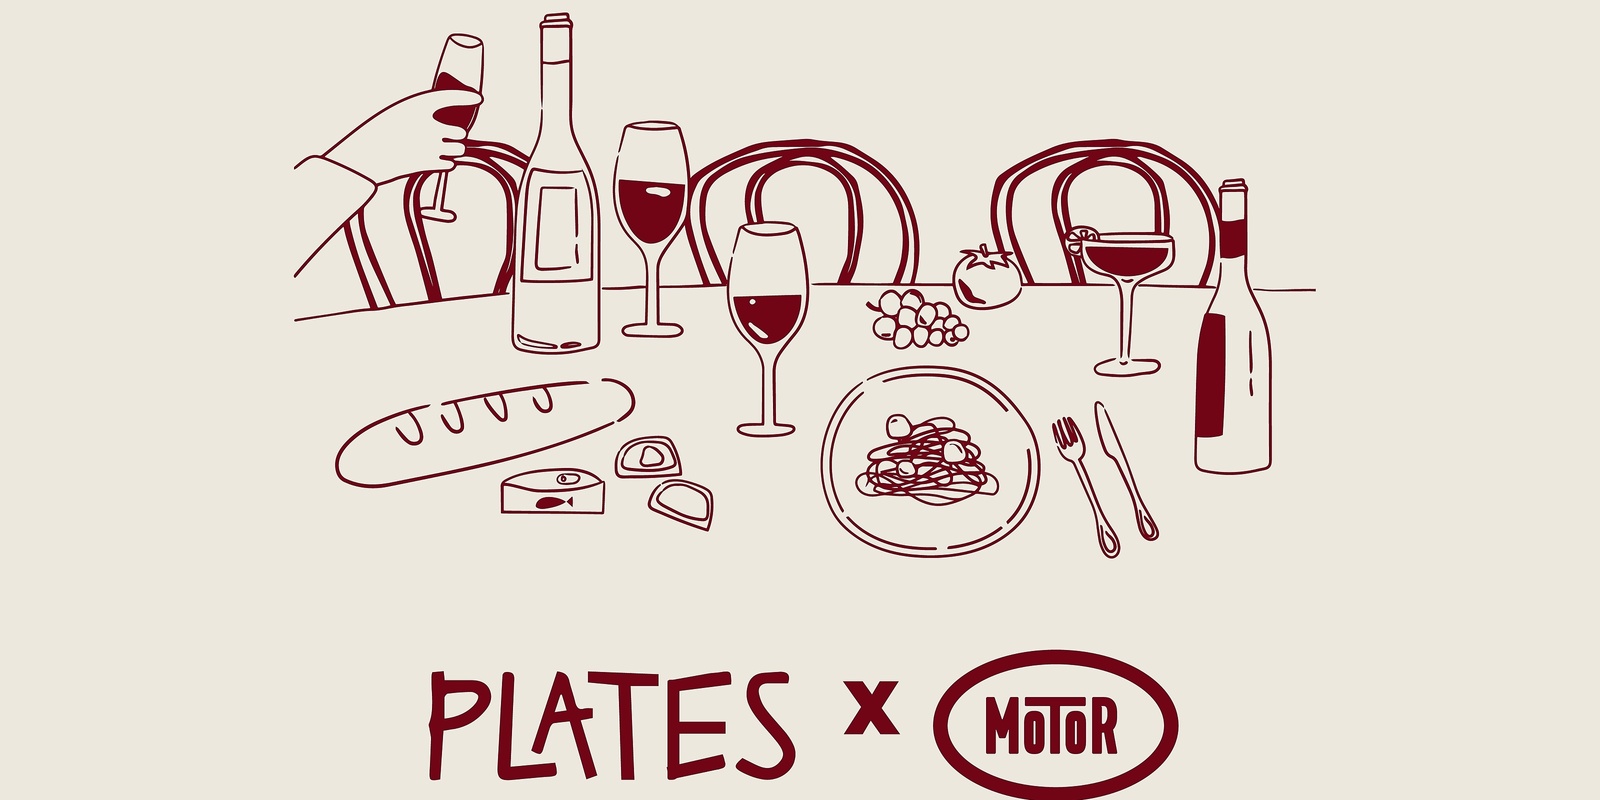 Banner image for Plates 